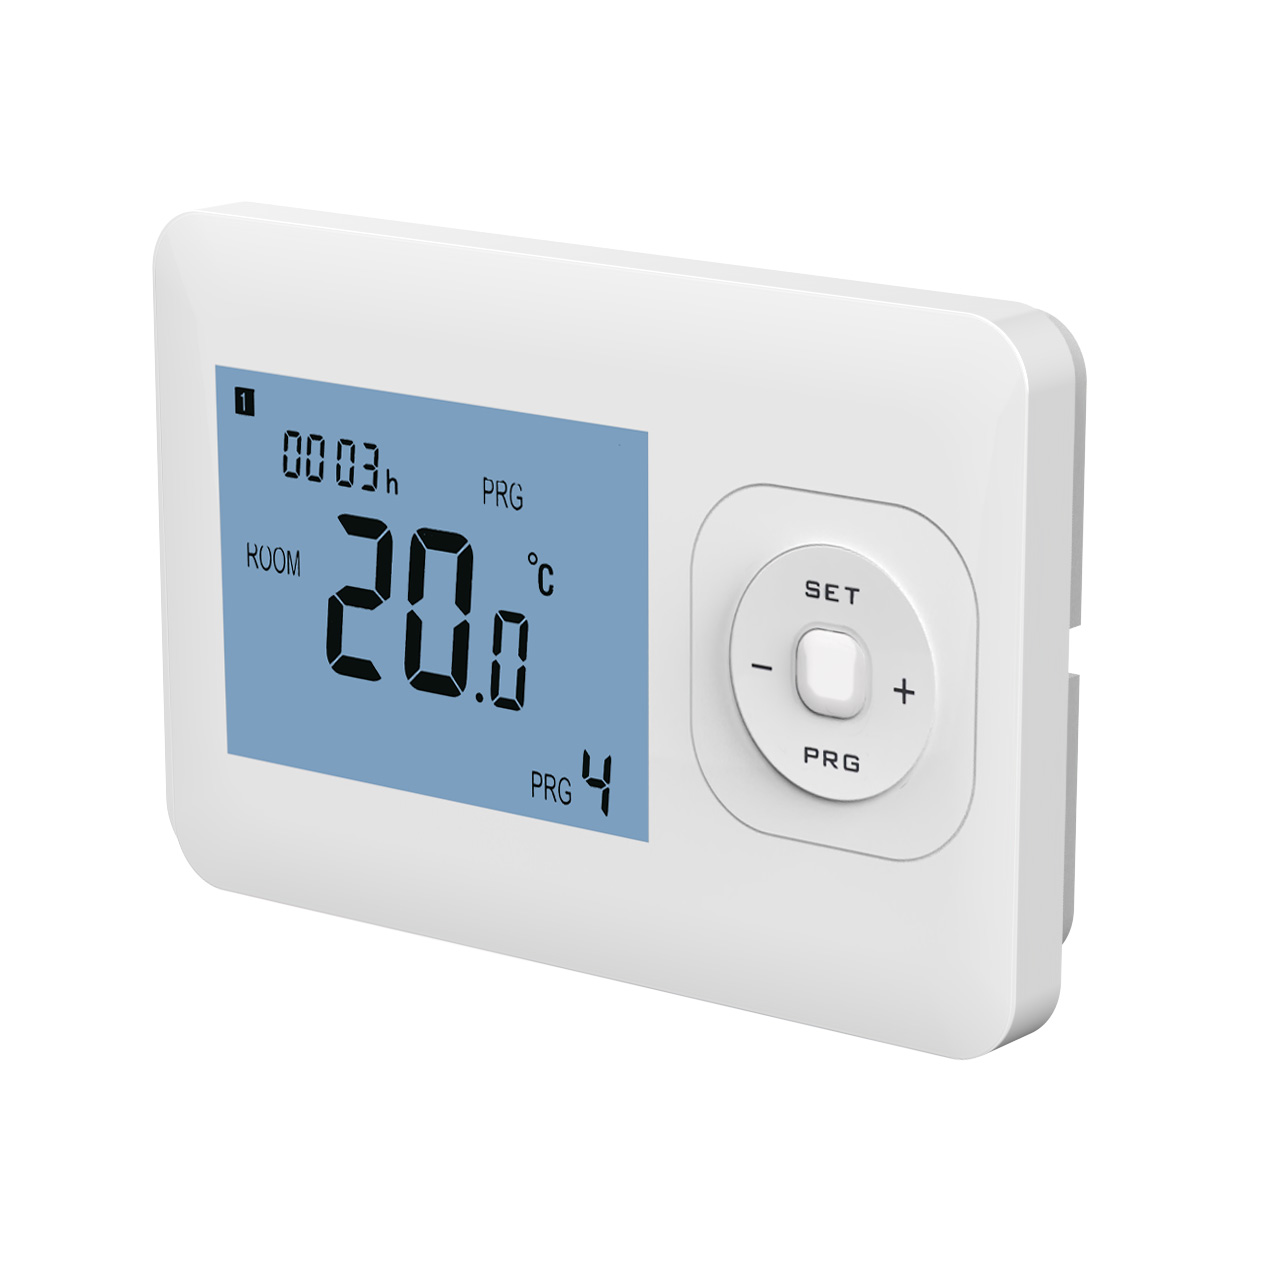 Digital Programmable Room Thermostat with LCD Display